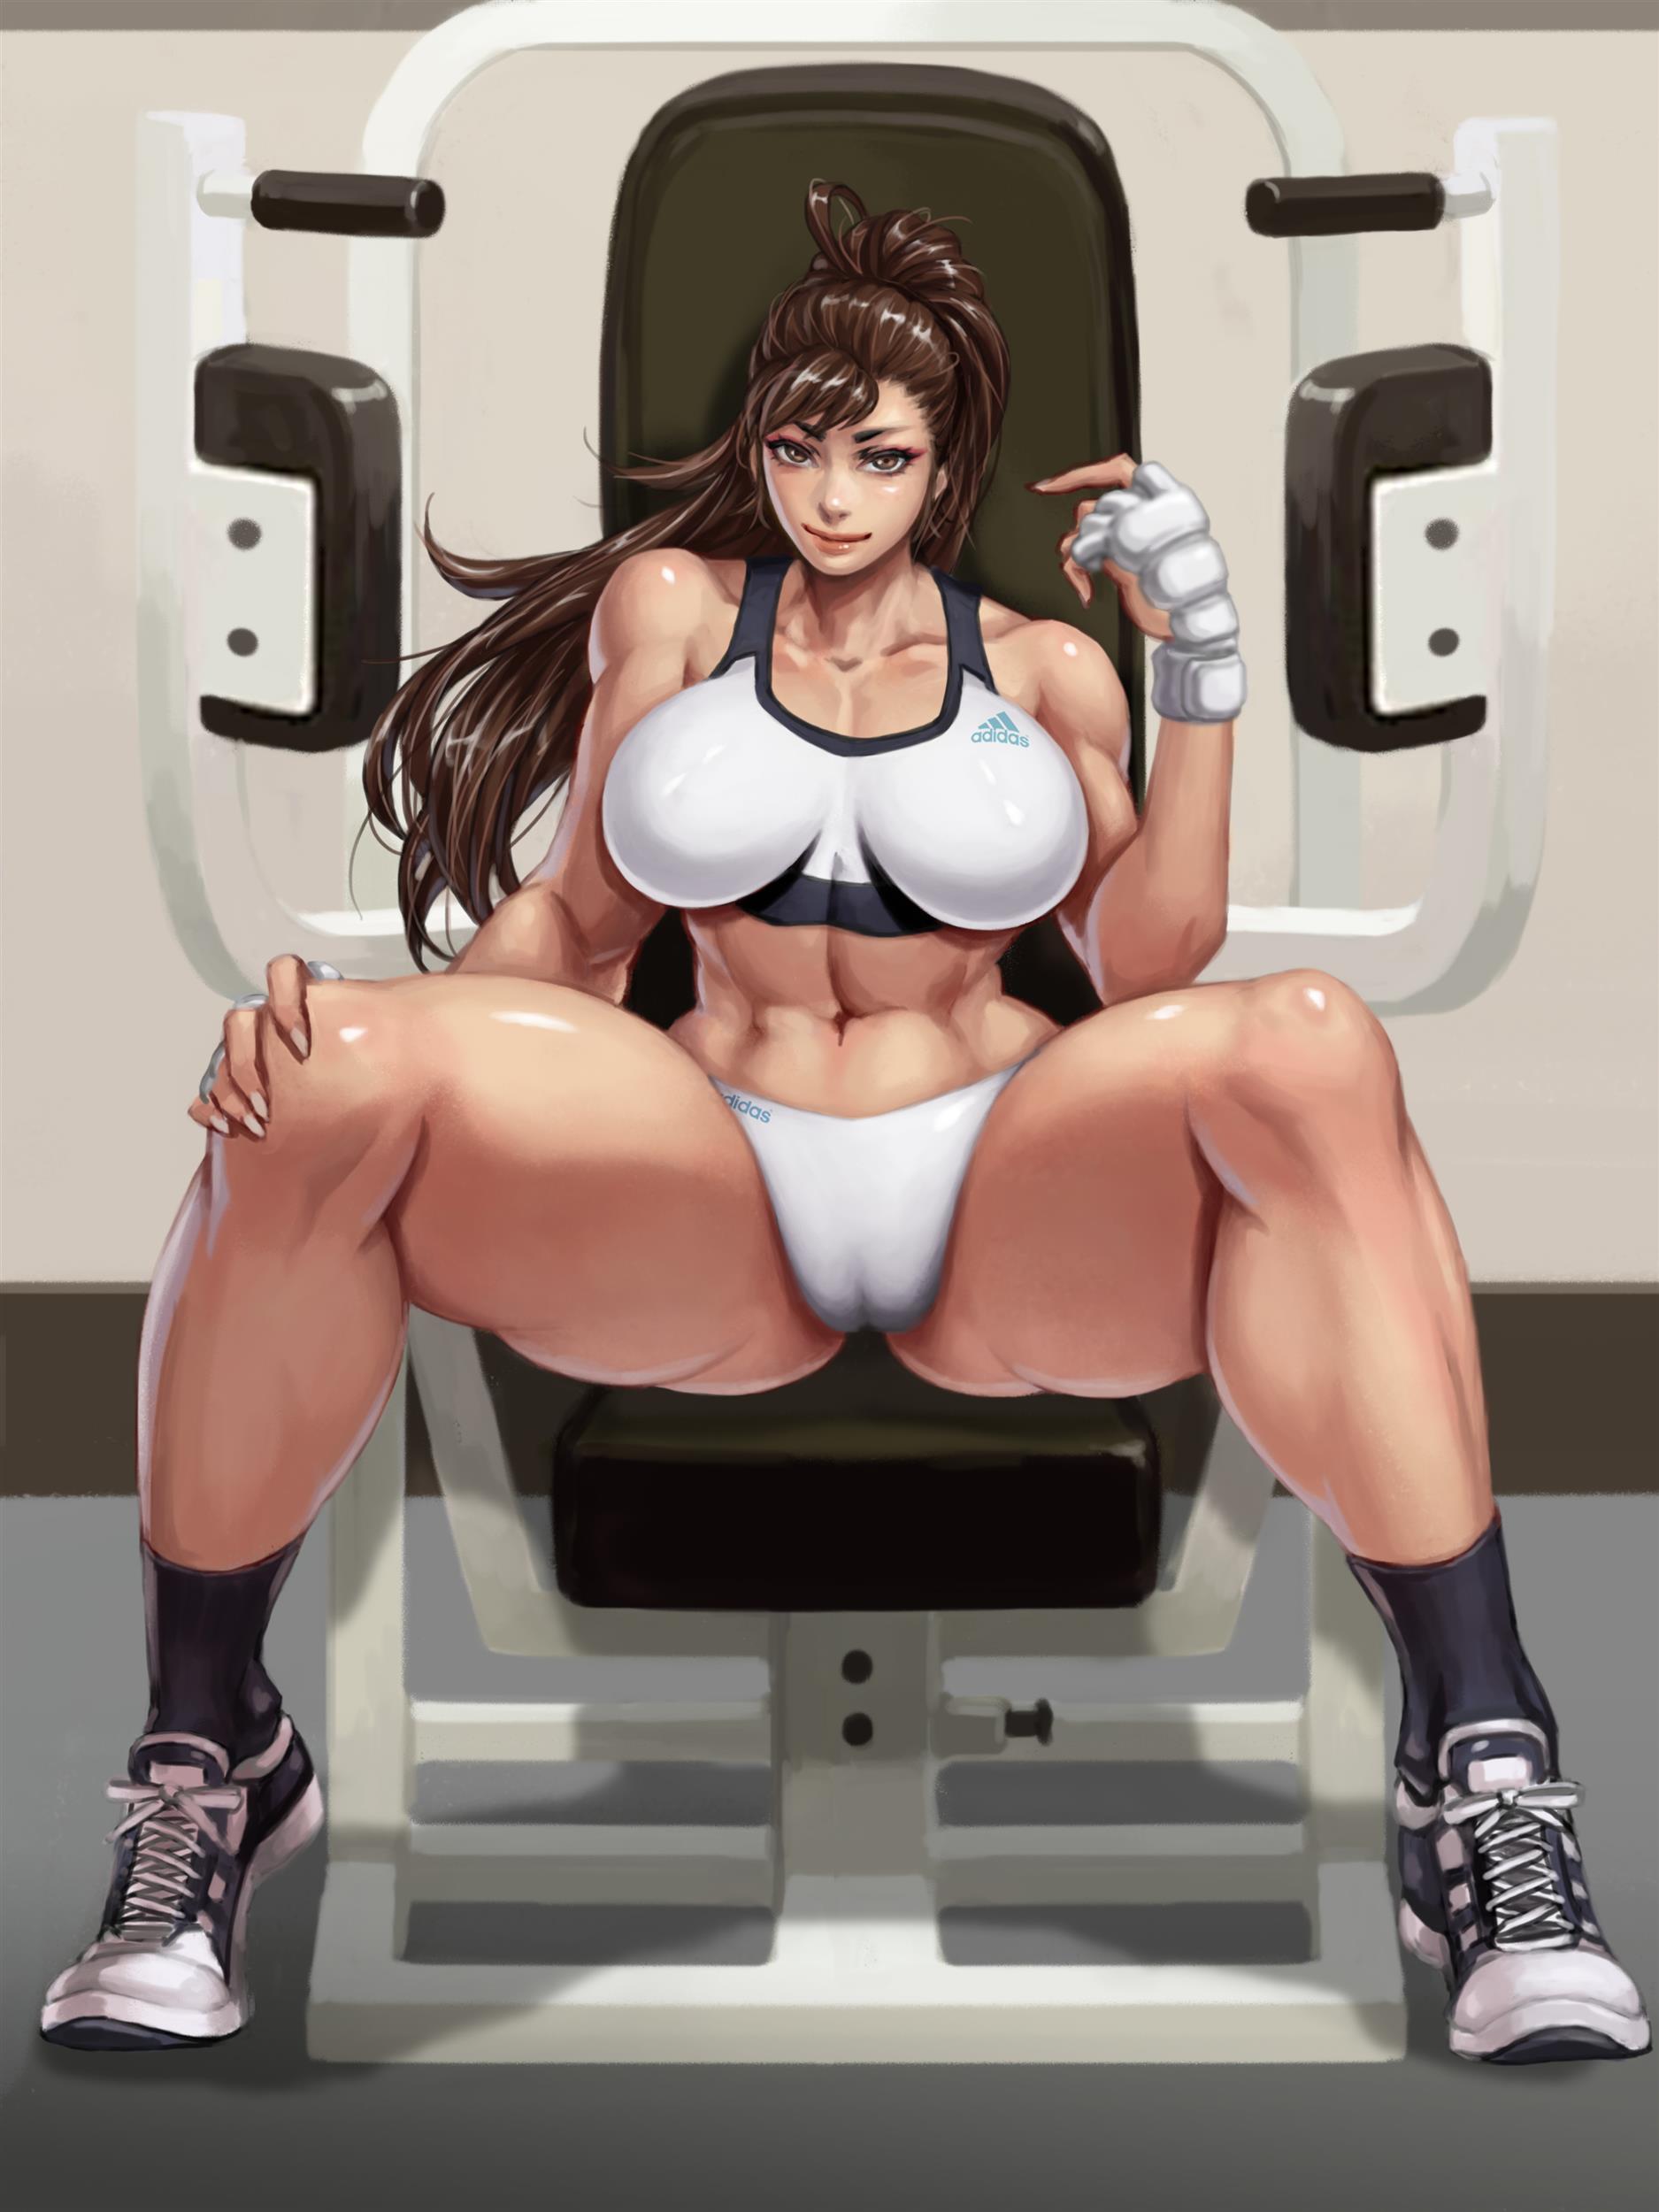 Chun Li Working Out With A Press Looking Thick Fit And Muscular